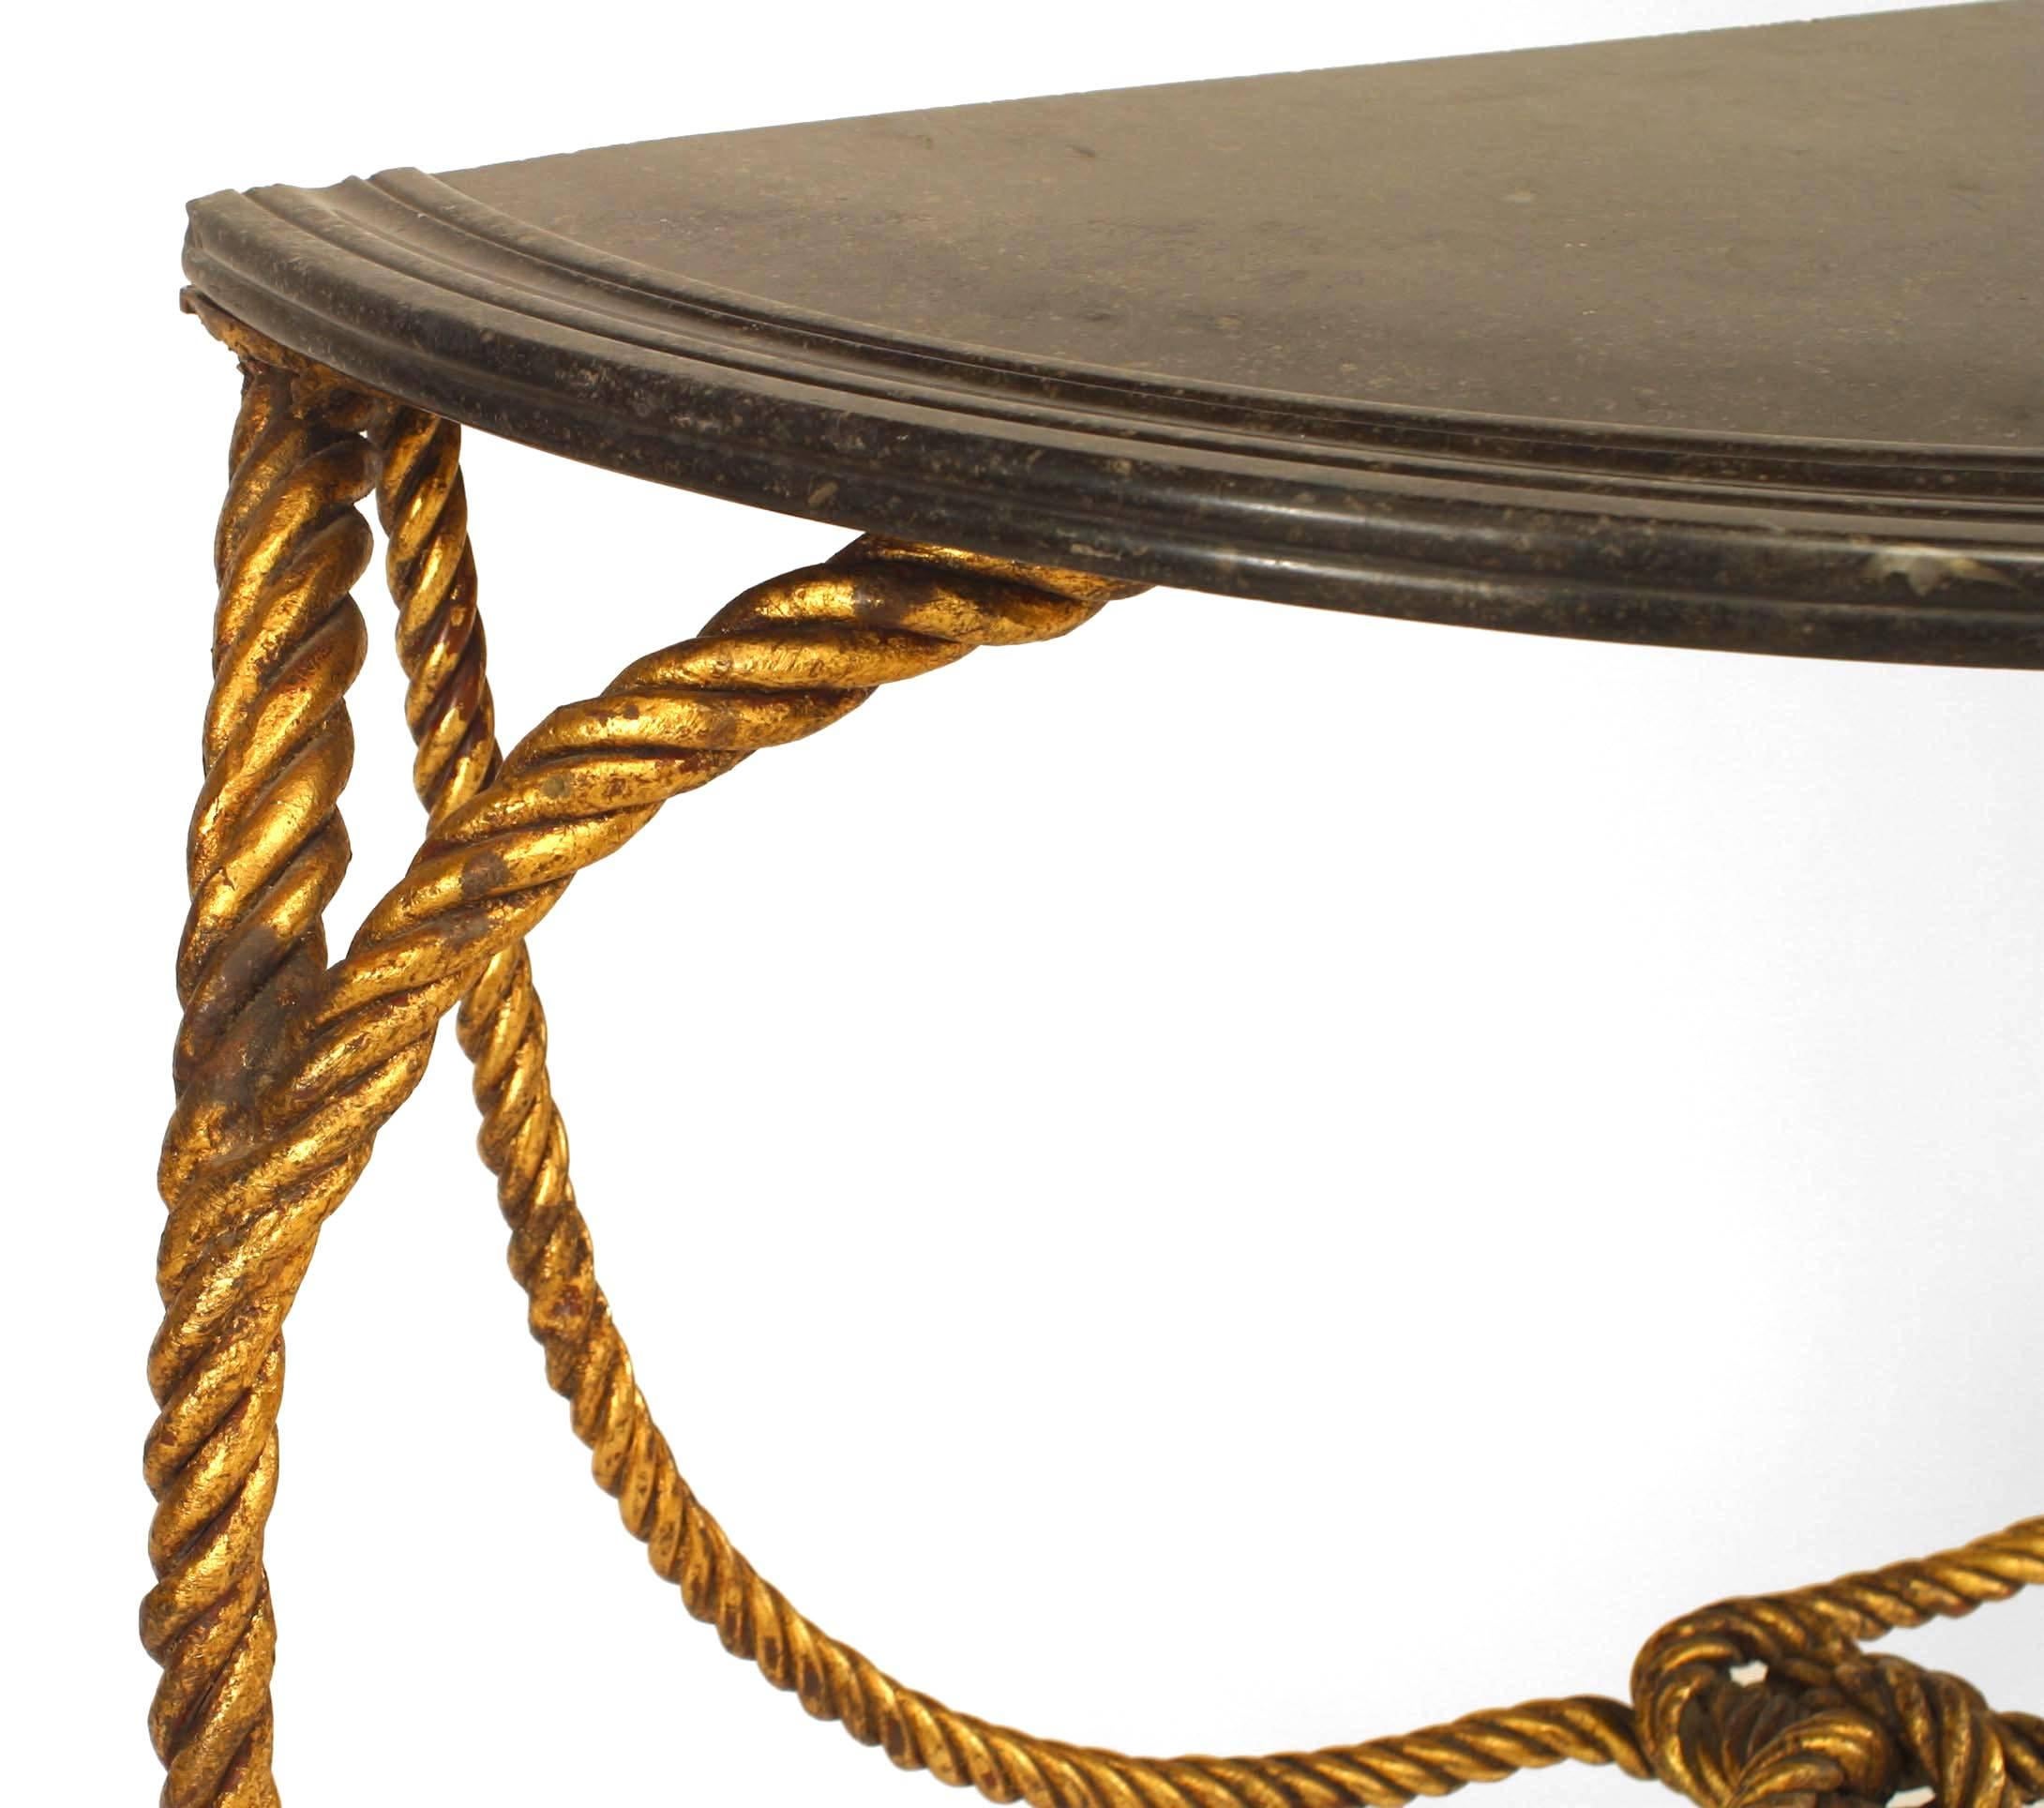 Hollywood Regency (20th Century) rope and tassel design gilt metal half round console table with marble top
